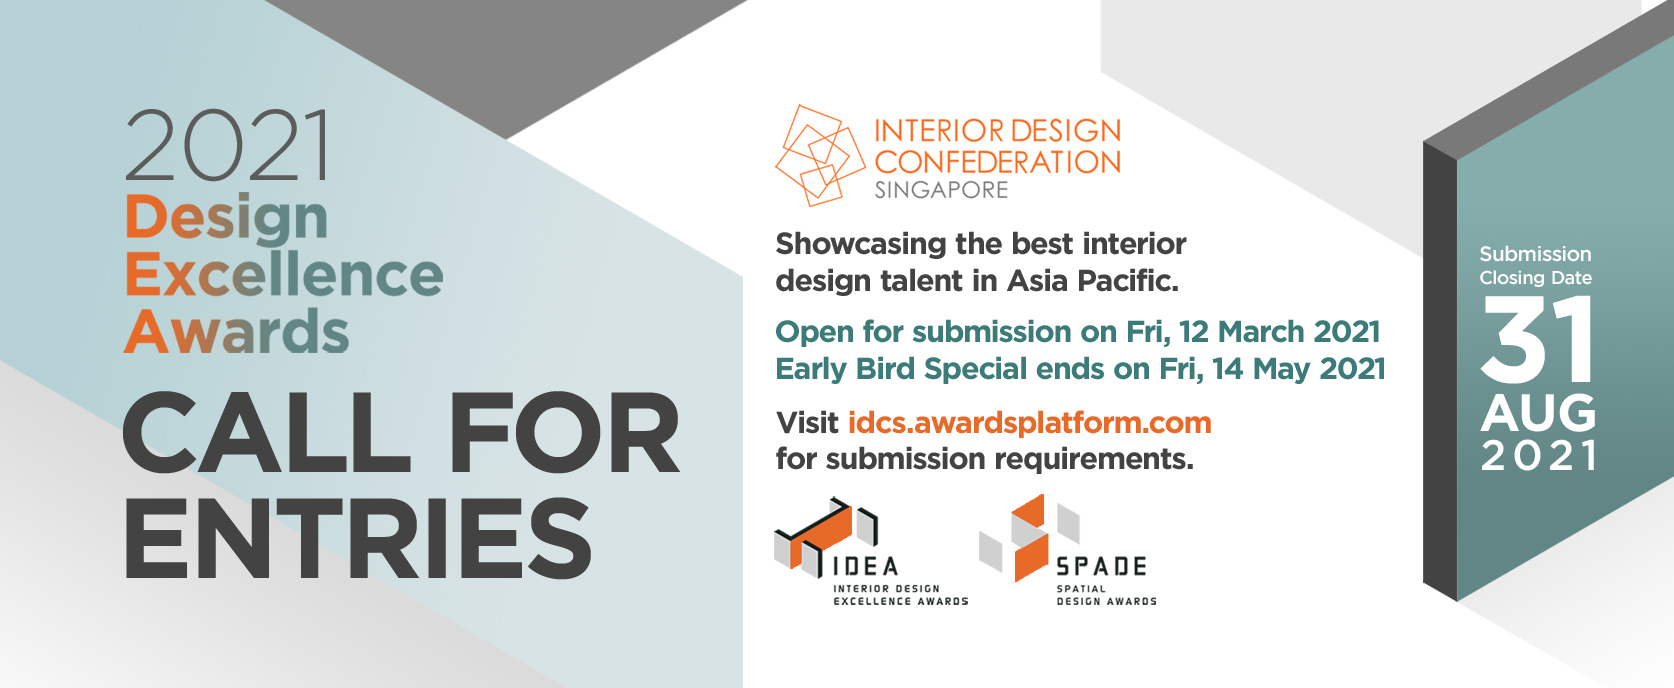 squarerooms idcs design excellence awards interior design confederation singapore submissions call for entries 2021 best design competition asia pacific